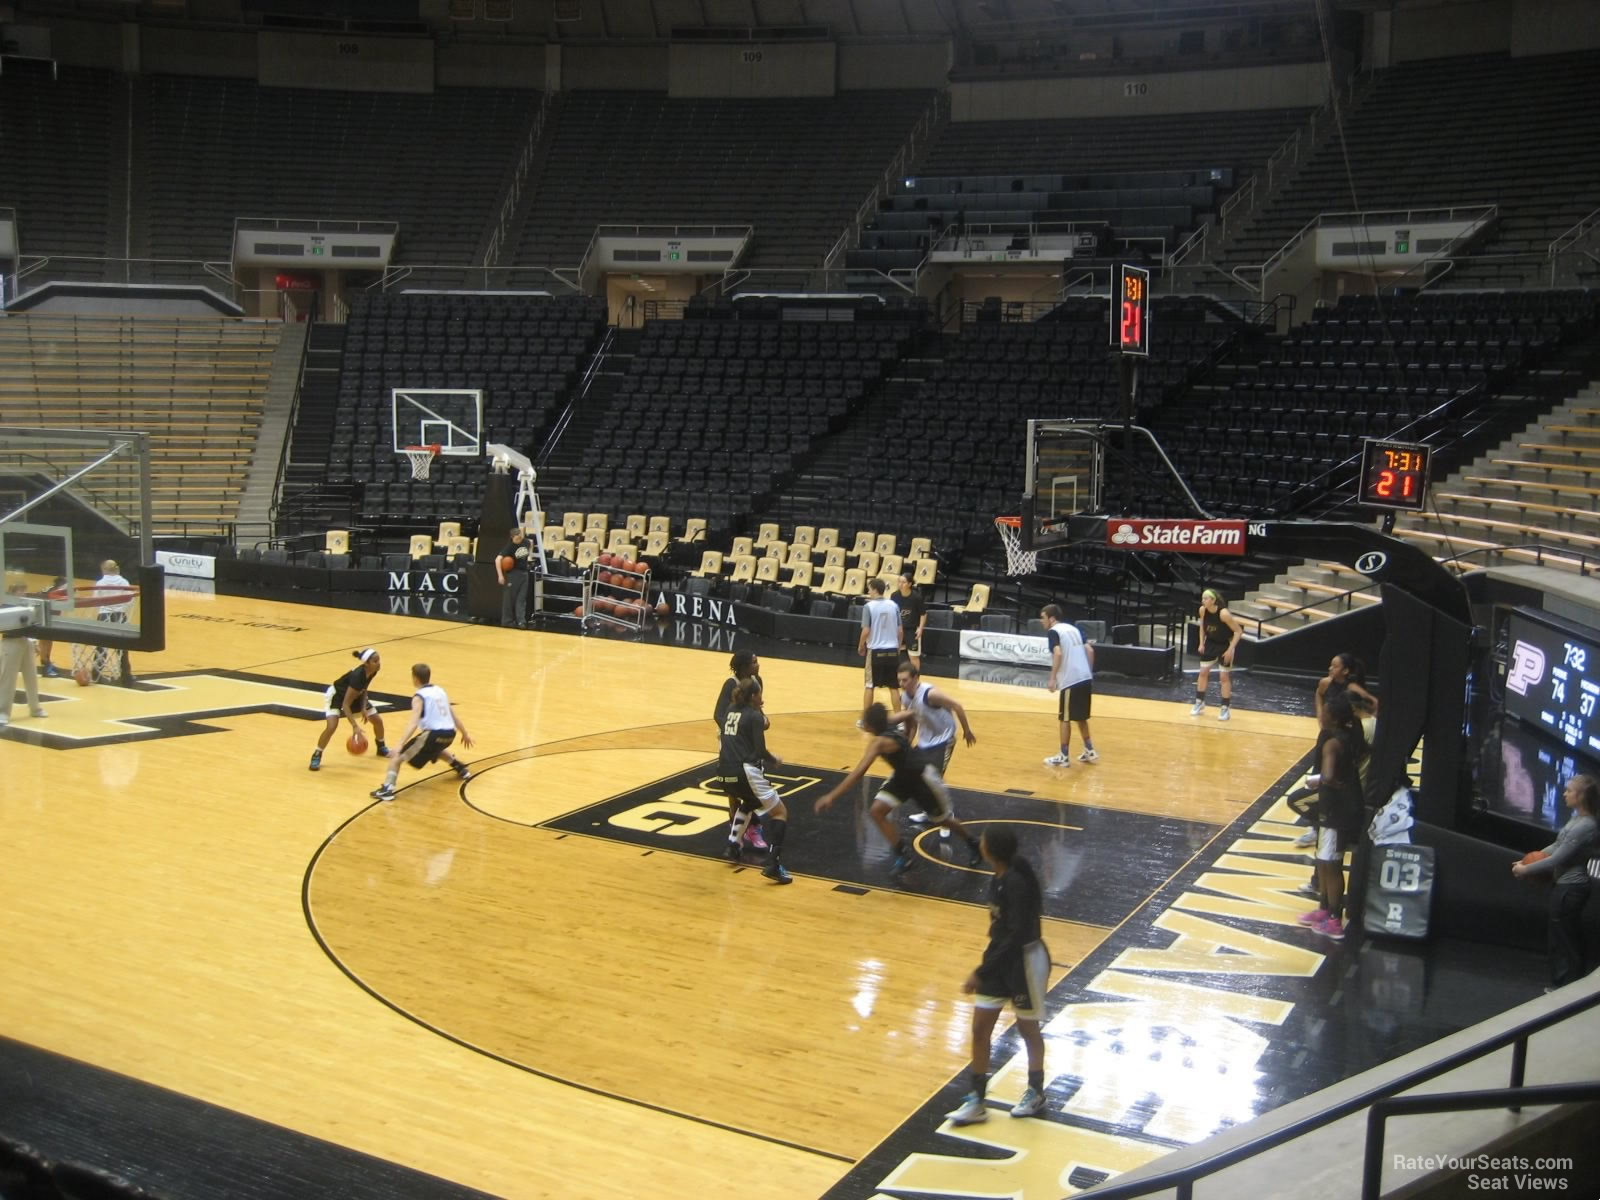 section 16, row 10 seat view  - mackey arena